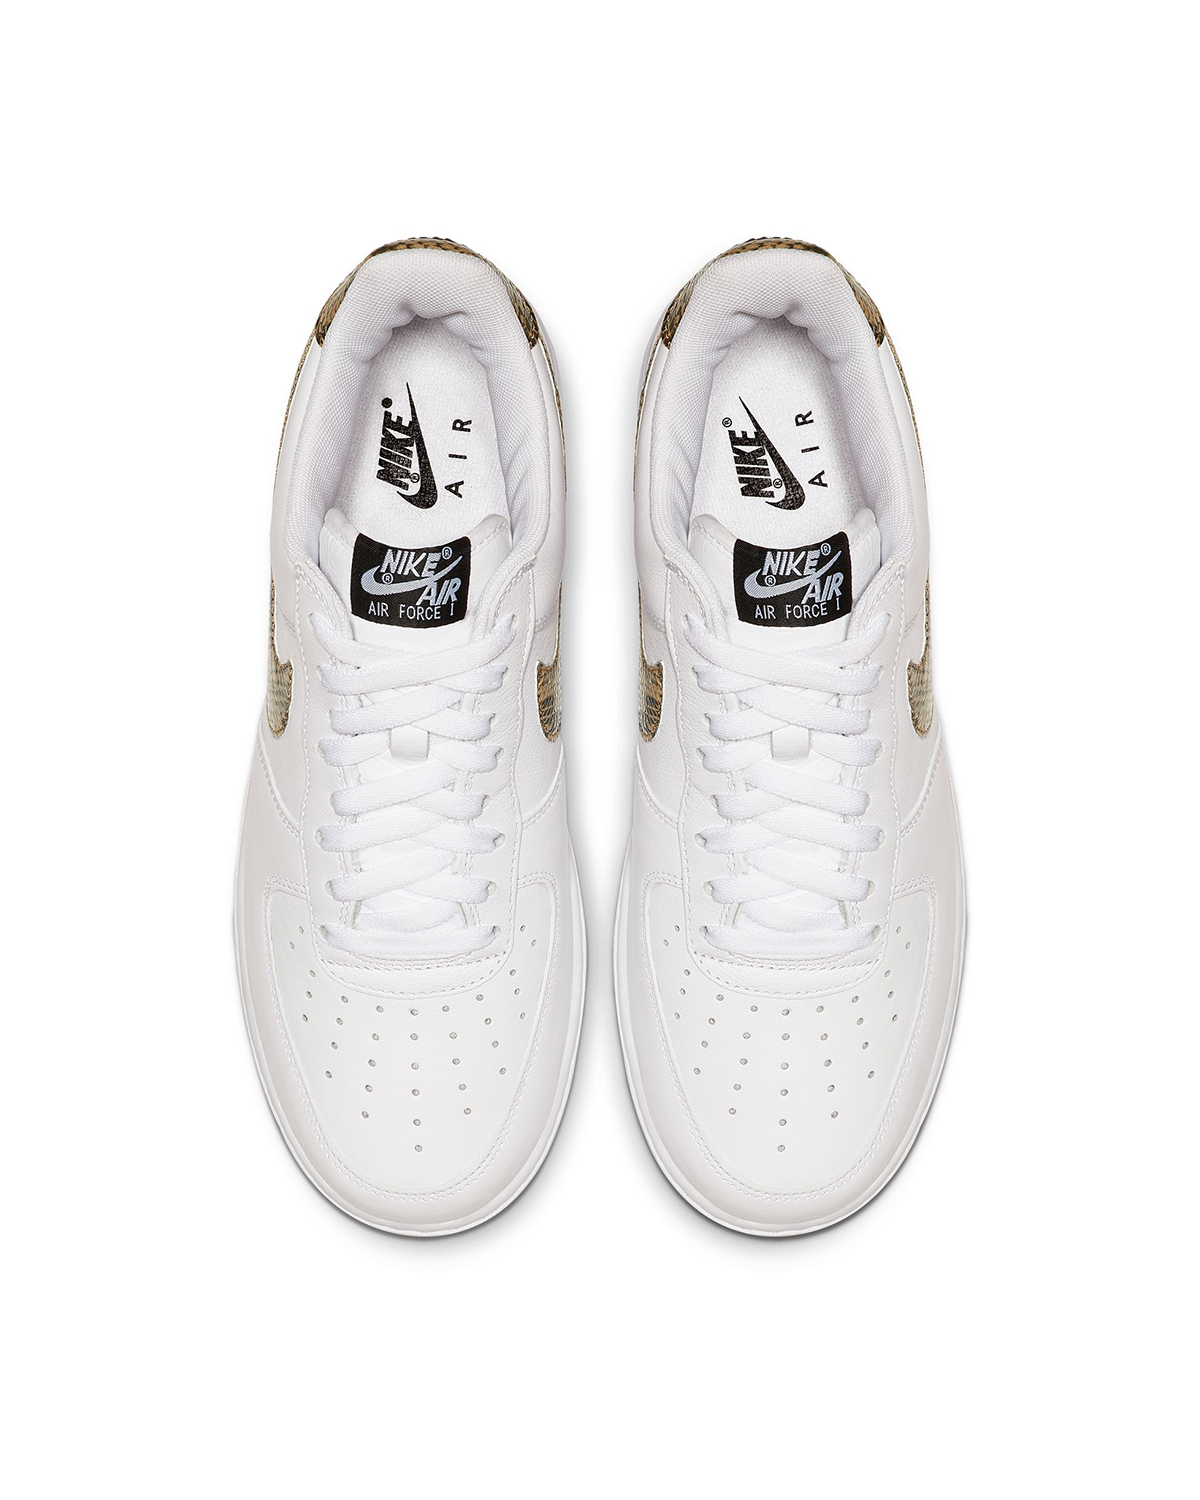 Air Force 1 Low Retro Prm 'Ivory Snake'